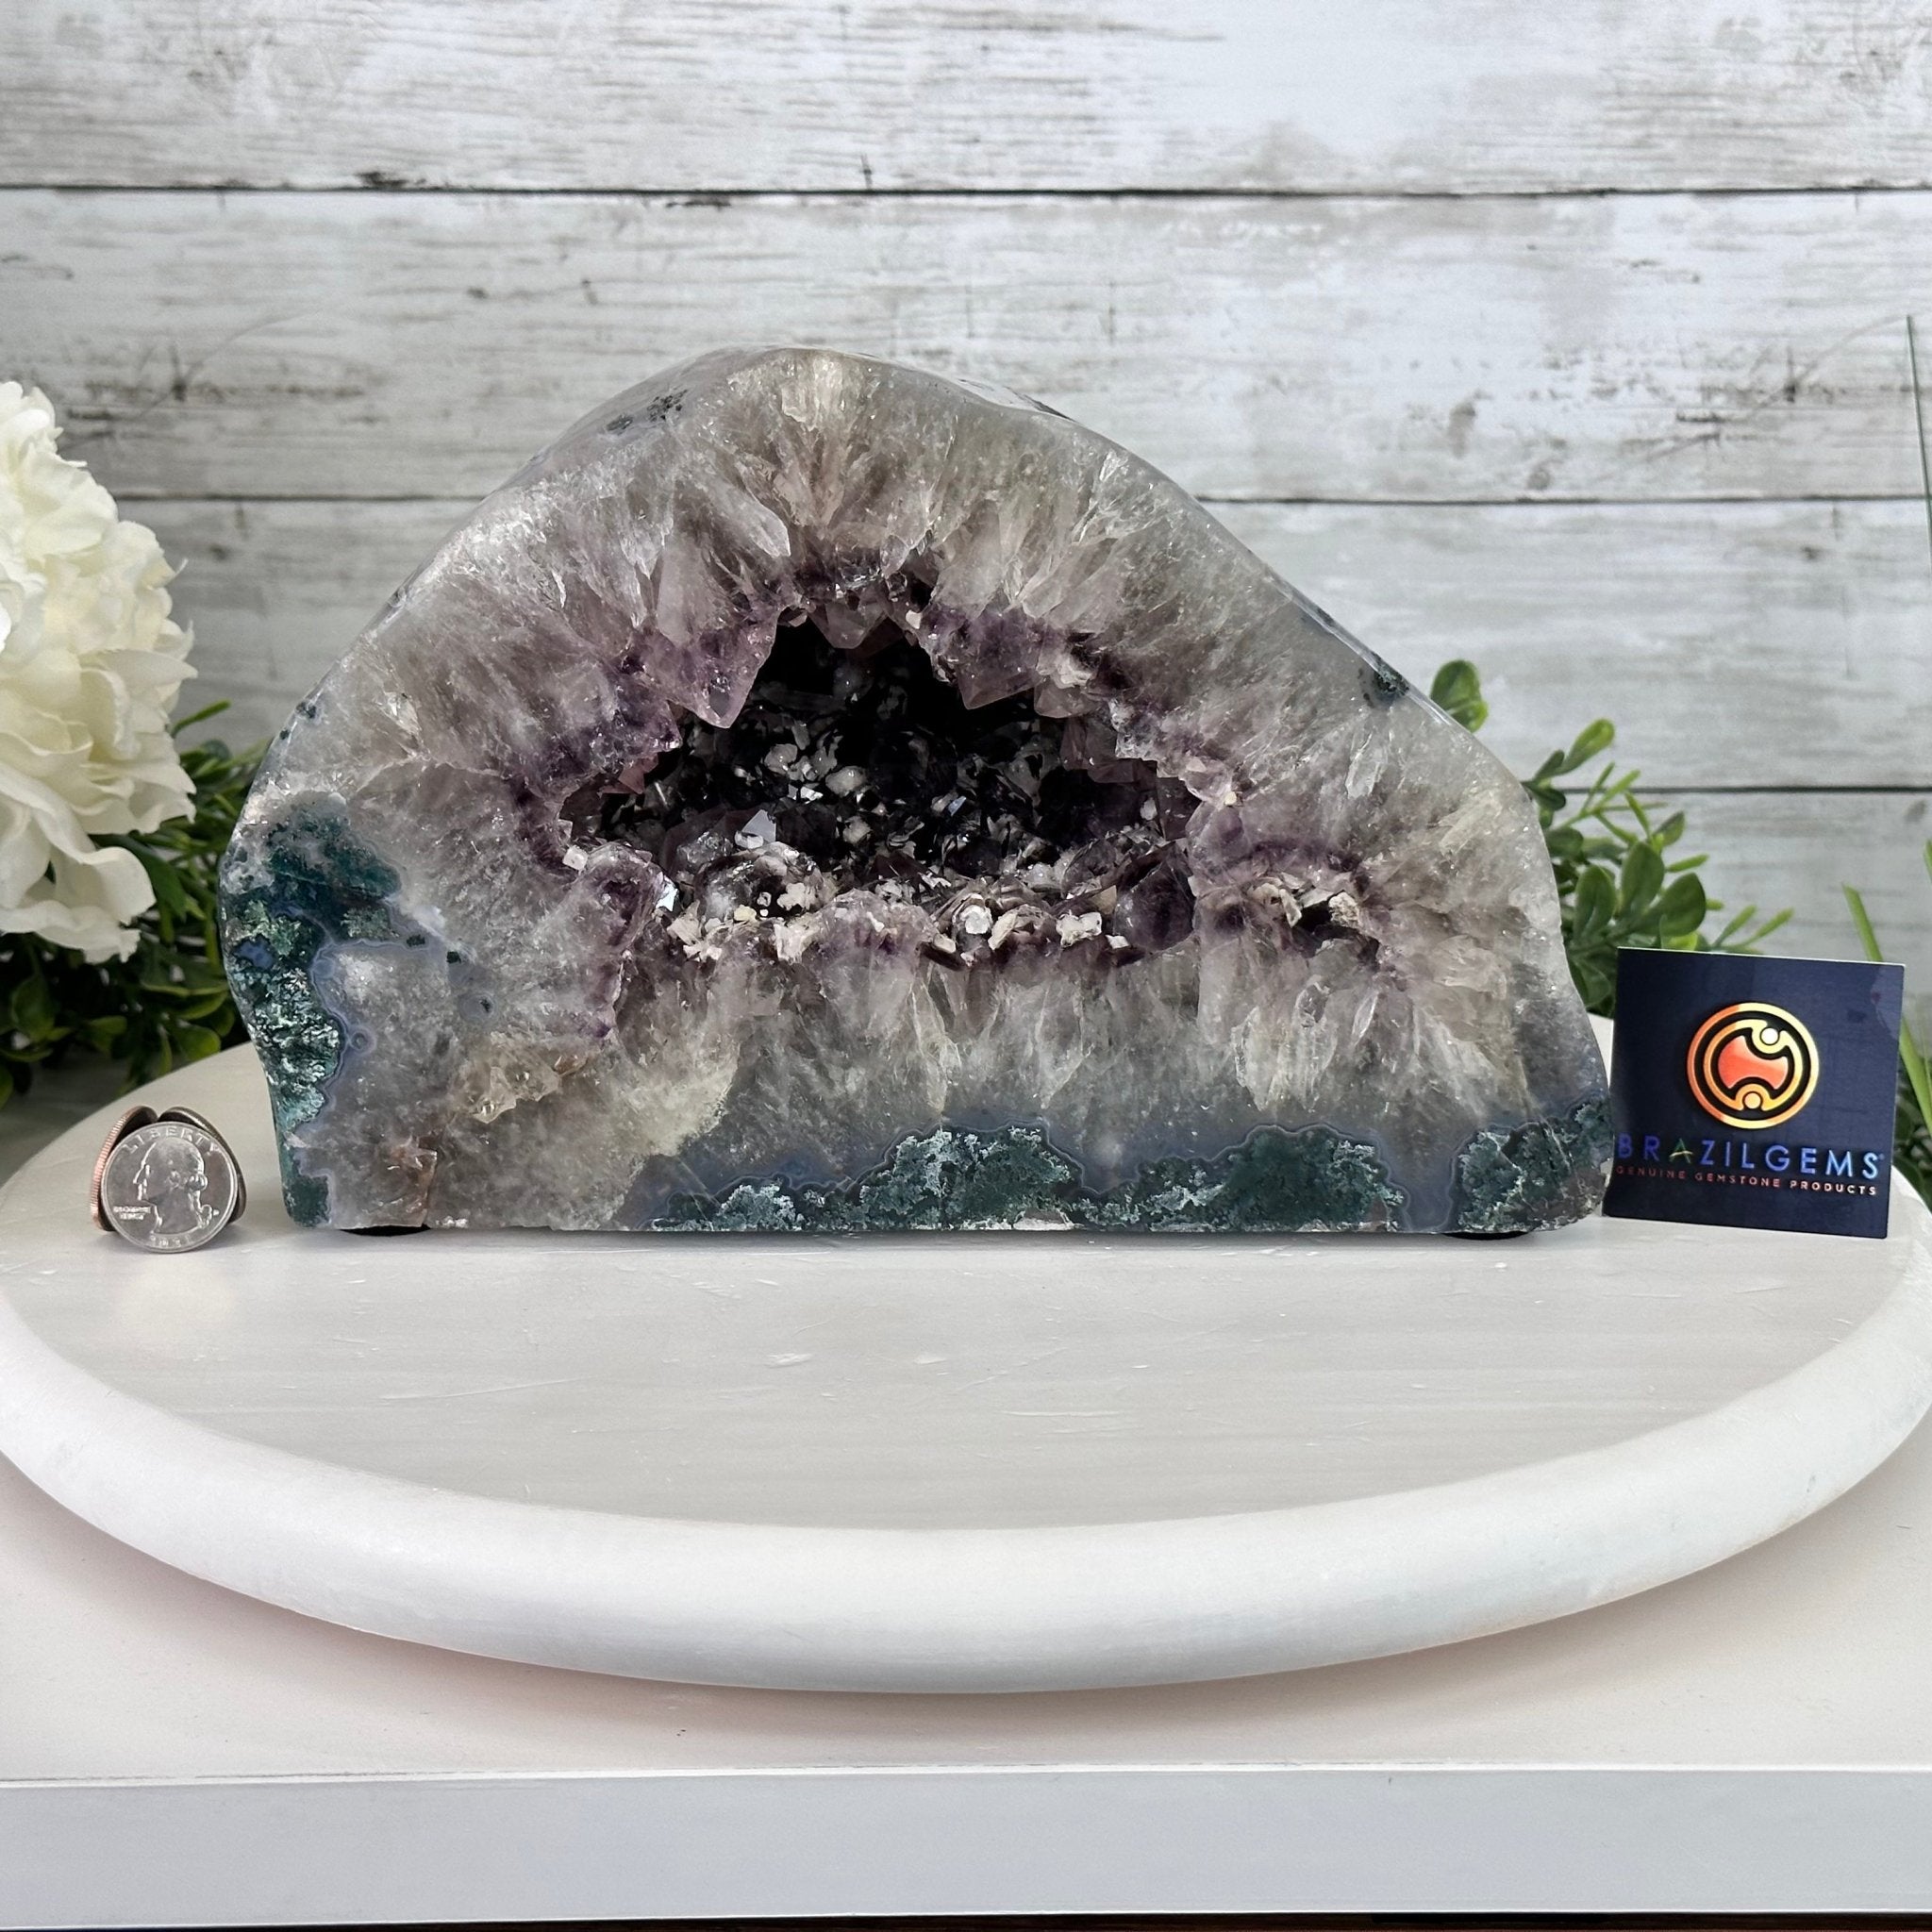 Extra Quality Polished Brazilian Amethyst Cathedral, 16.9 lbs & 6.6" tall Model #5602-0172 by Brazil Gems - Brazil GemsBrazil GemsExtra Quality Polished Brazilian Amethyst Cathedral, 16.9 lbs & 6.6" tall Model #5602-0172 by Brazil GemsPolished Cathedrals5602-0172